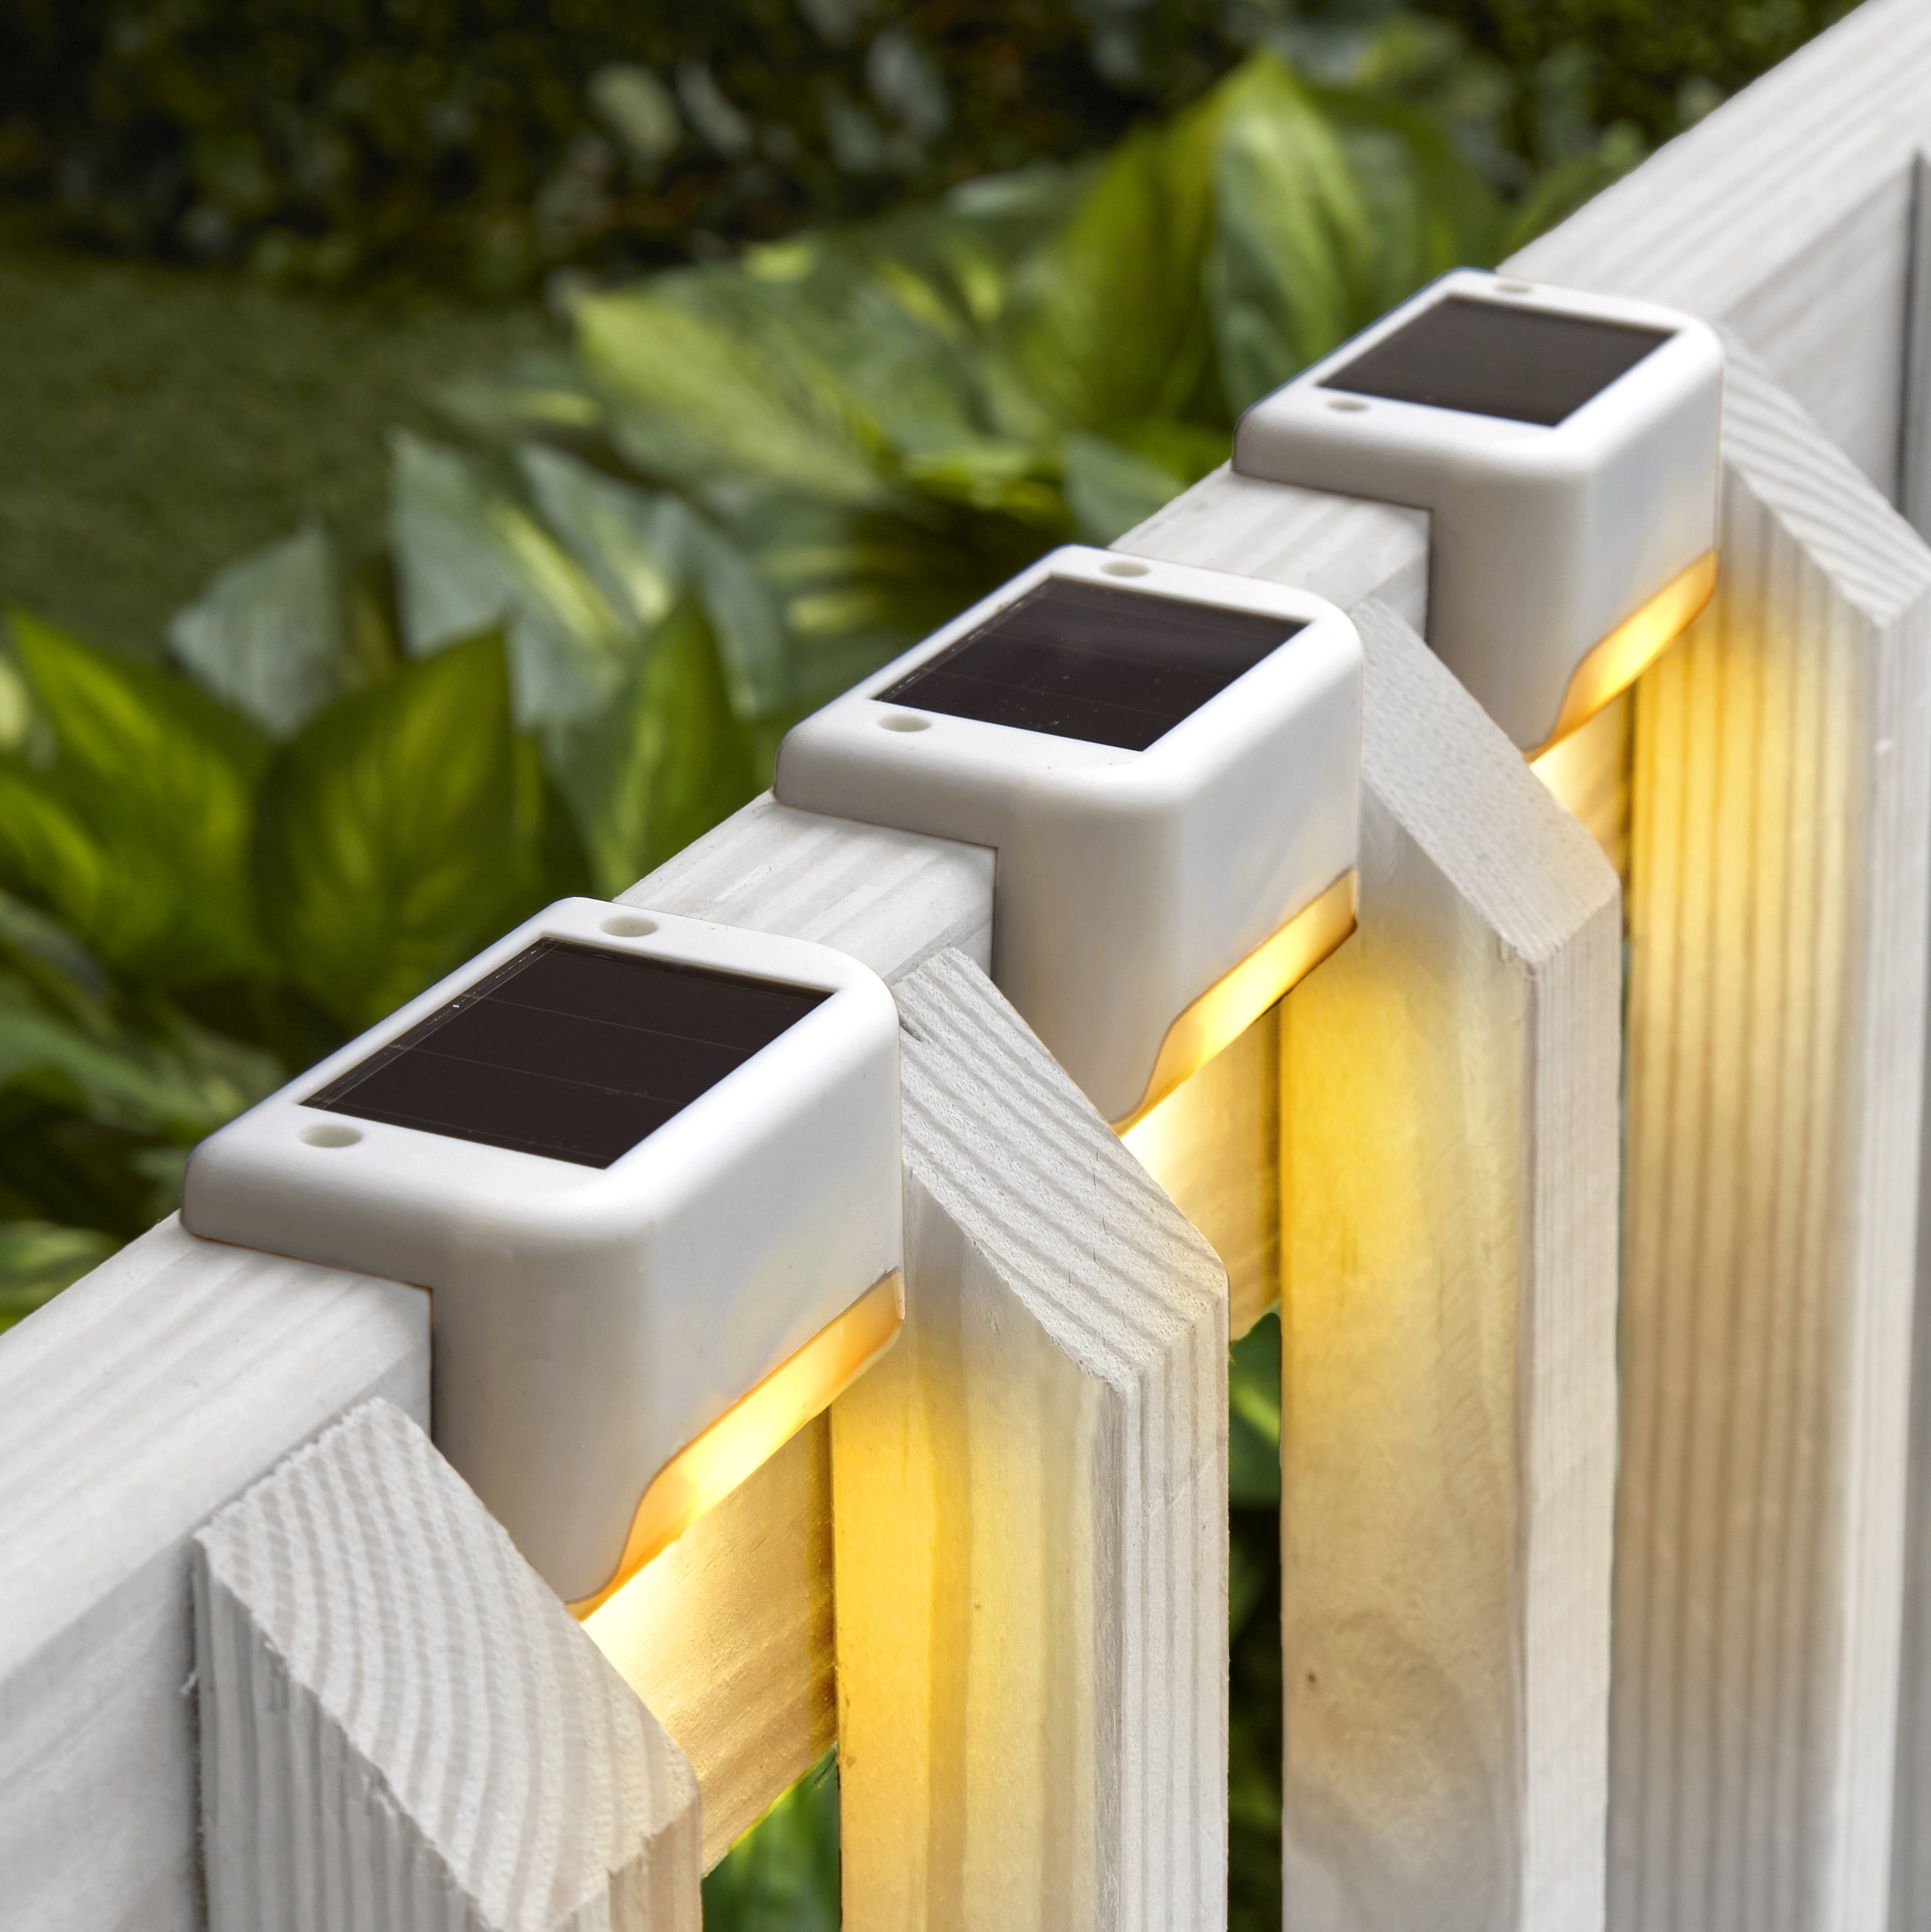 Set of 3 Solar Crystal-Like Stainless Steel Clip-On Porch Deck Railing Lights 